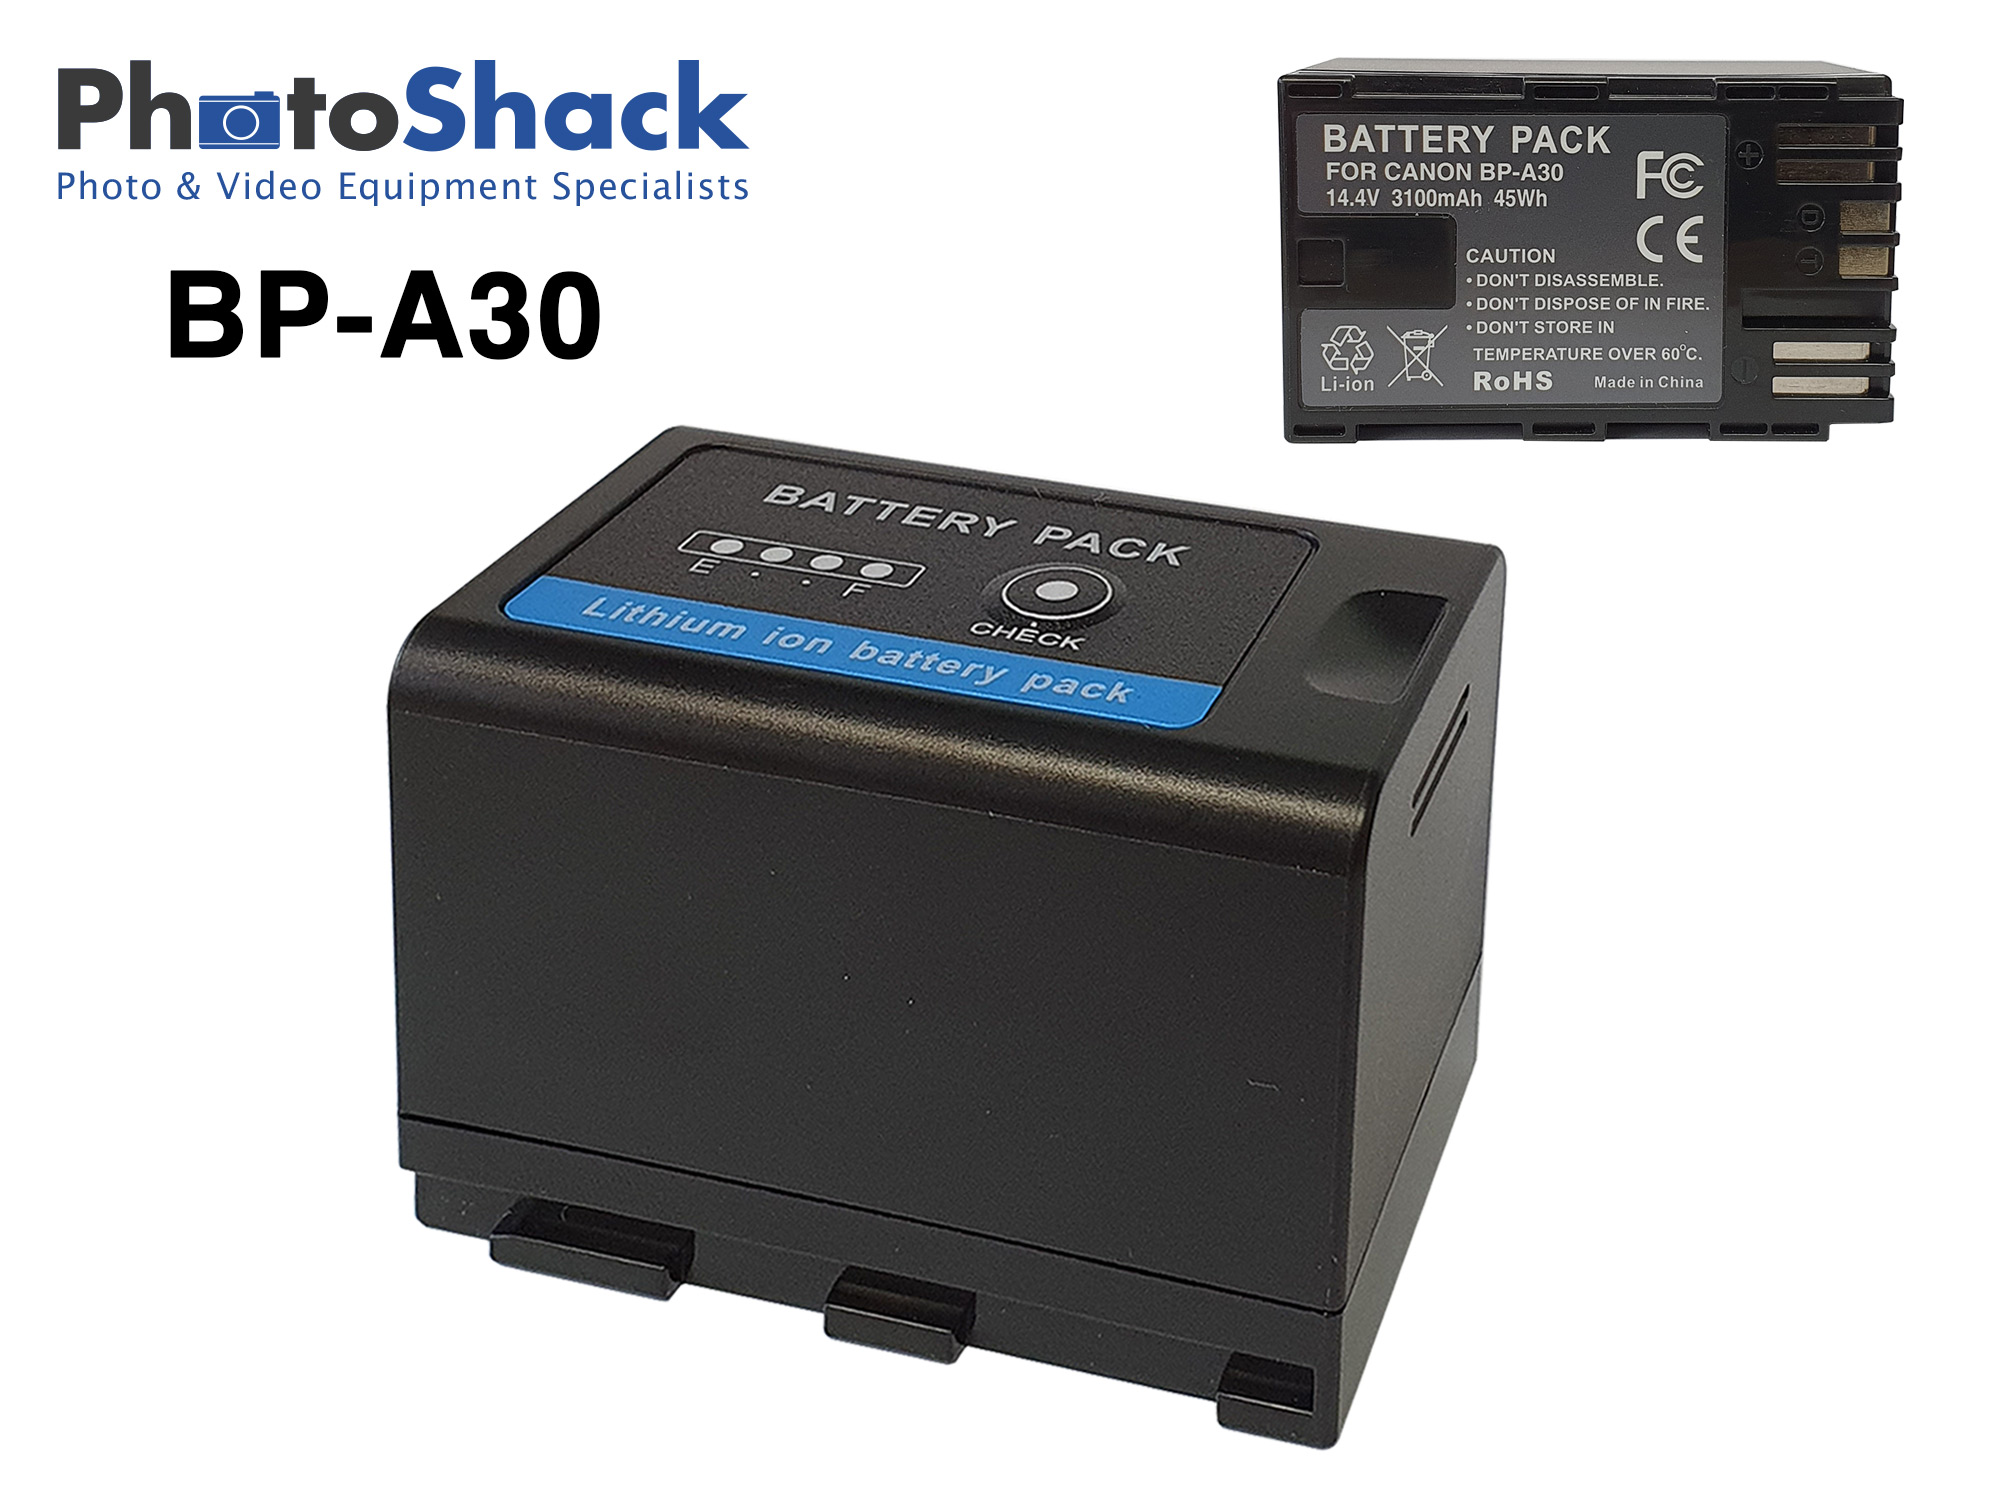 BP-A30 Battery Pack For EOS C300 Mark II, C200, and C200B